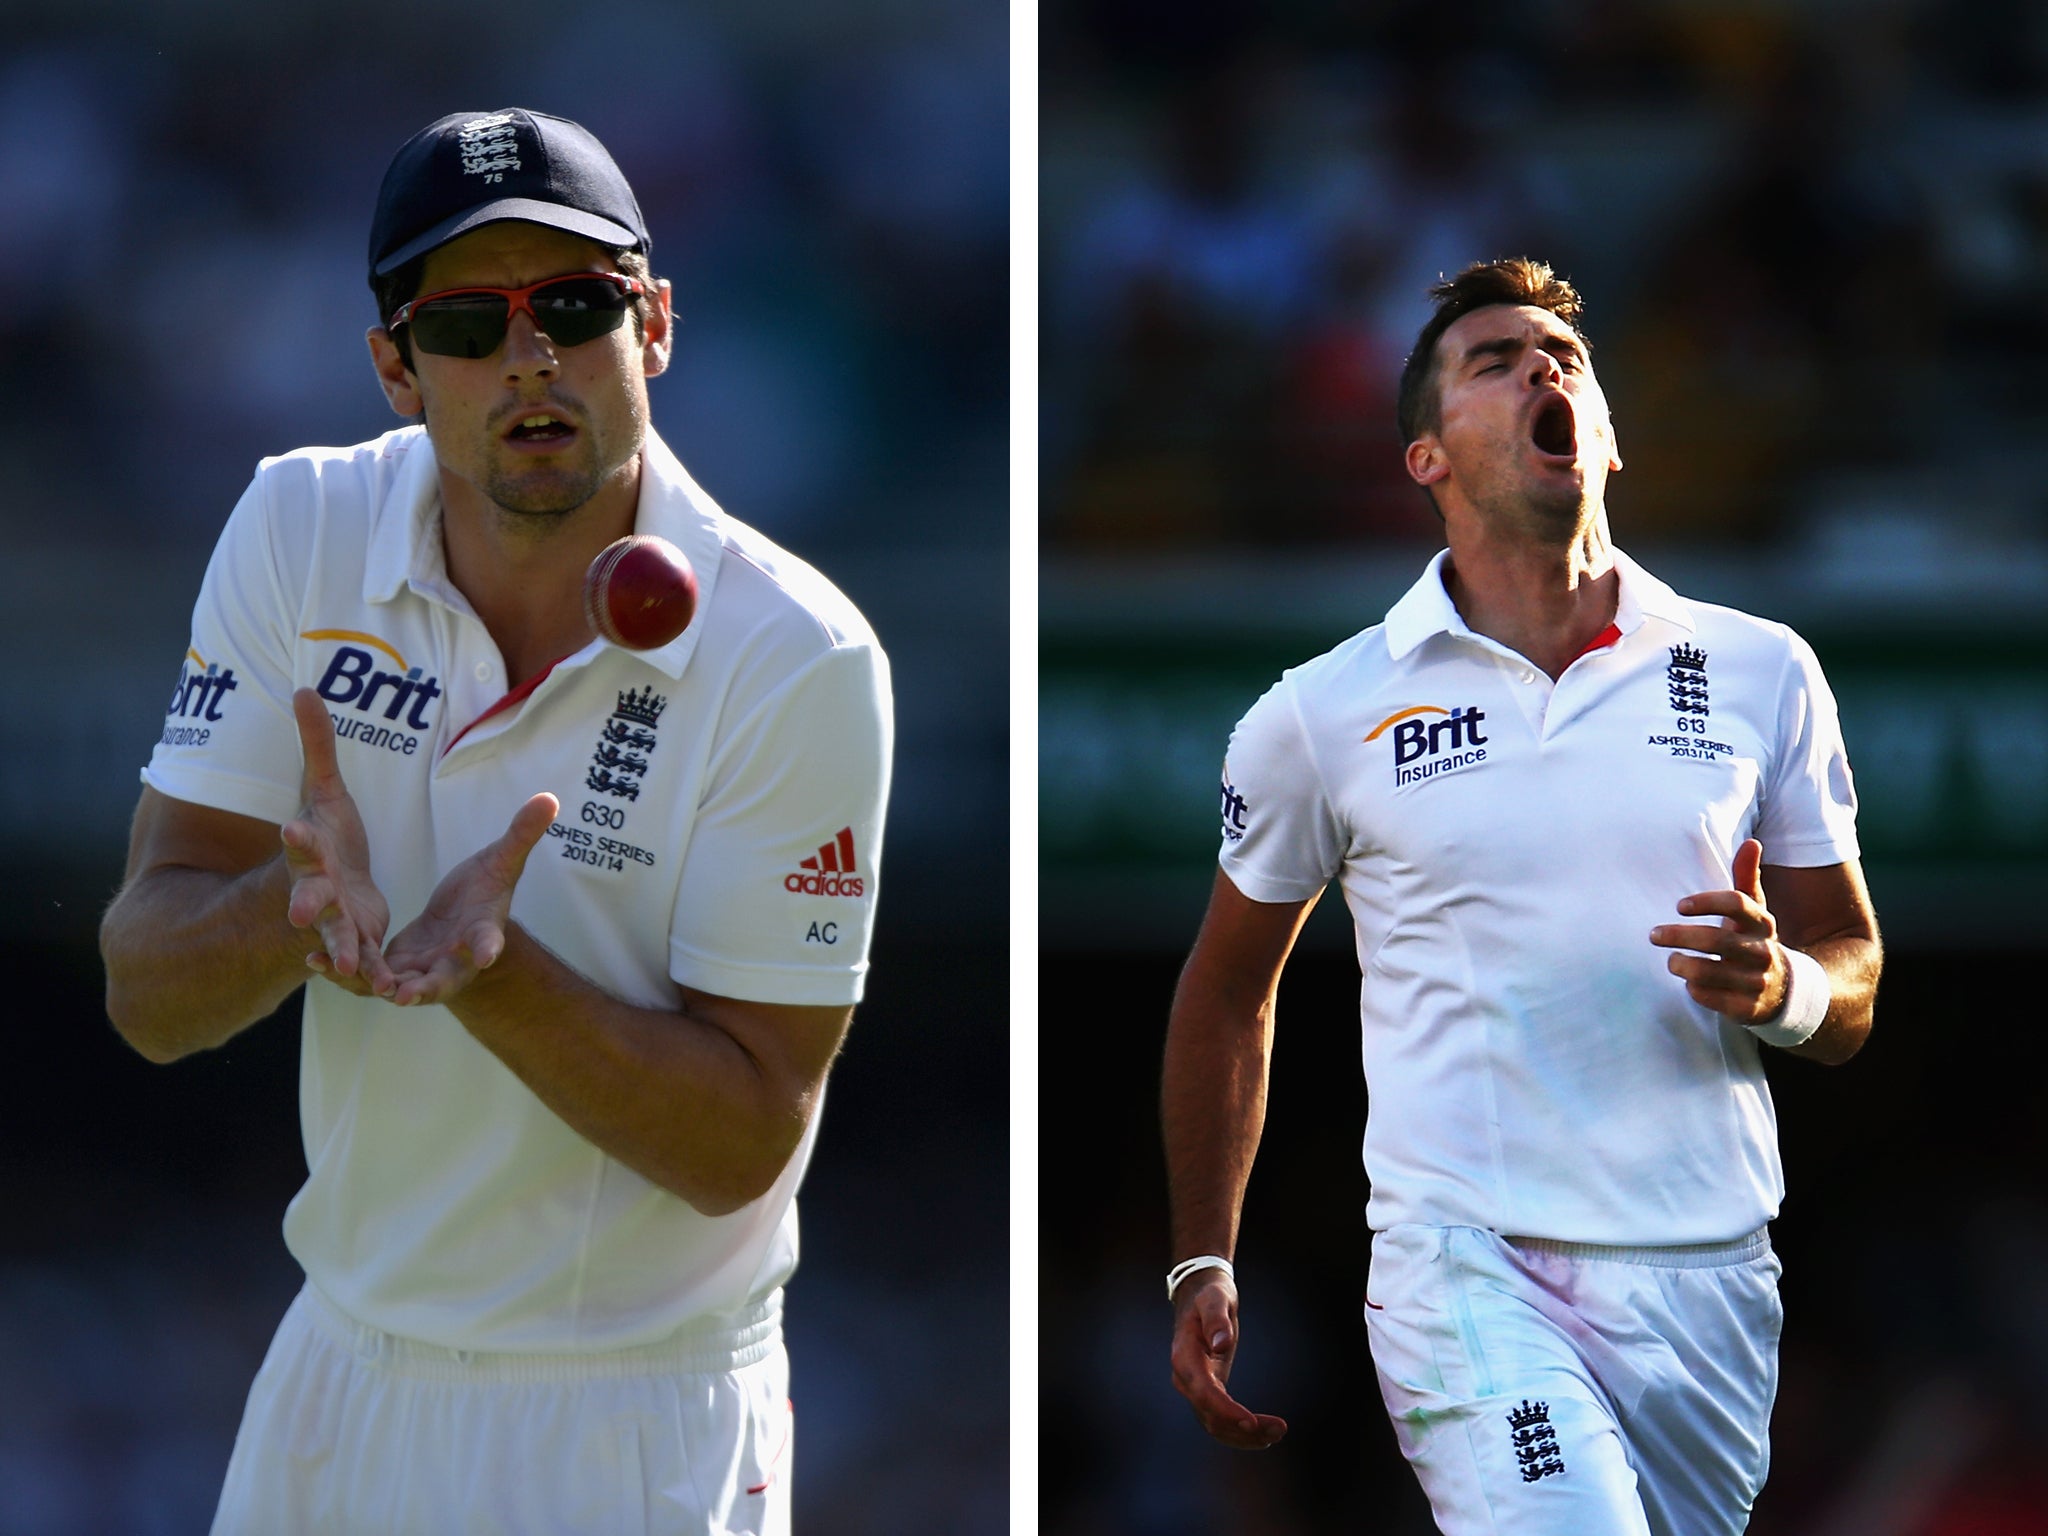 Alastair Cook and James Anderson have been nominated for the ICC Cricketer of the Year award